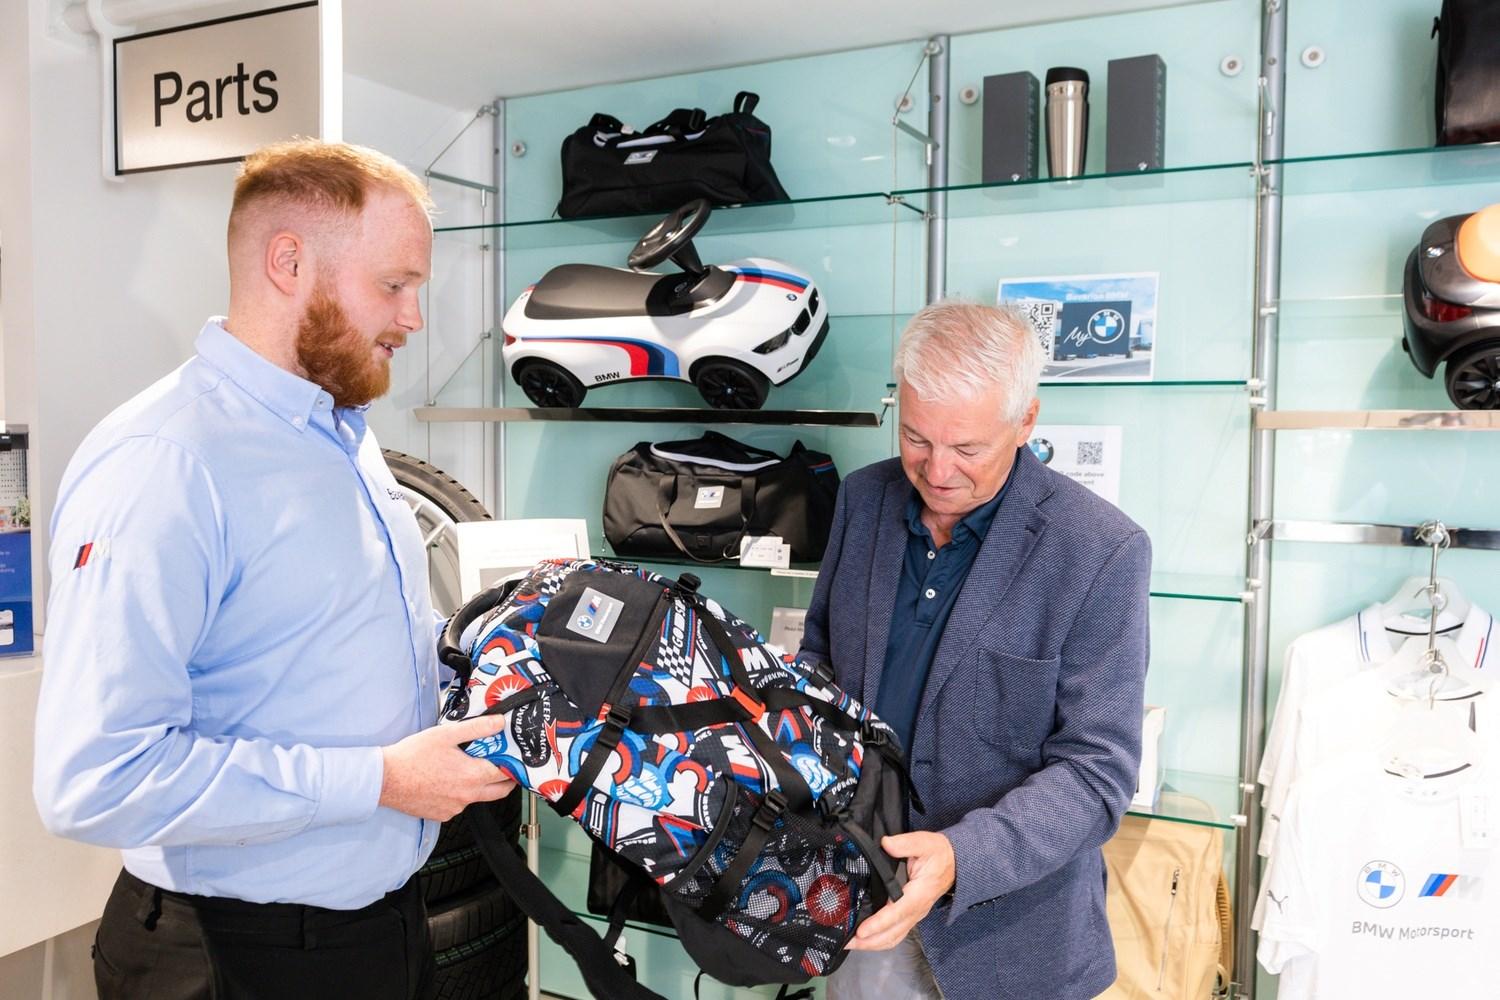 BMW Sales Specialist shows customer the latest BMW Backpack while at the BMW Boutique in Bavarian BMW, Belfast.